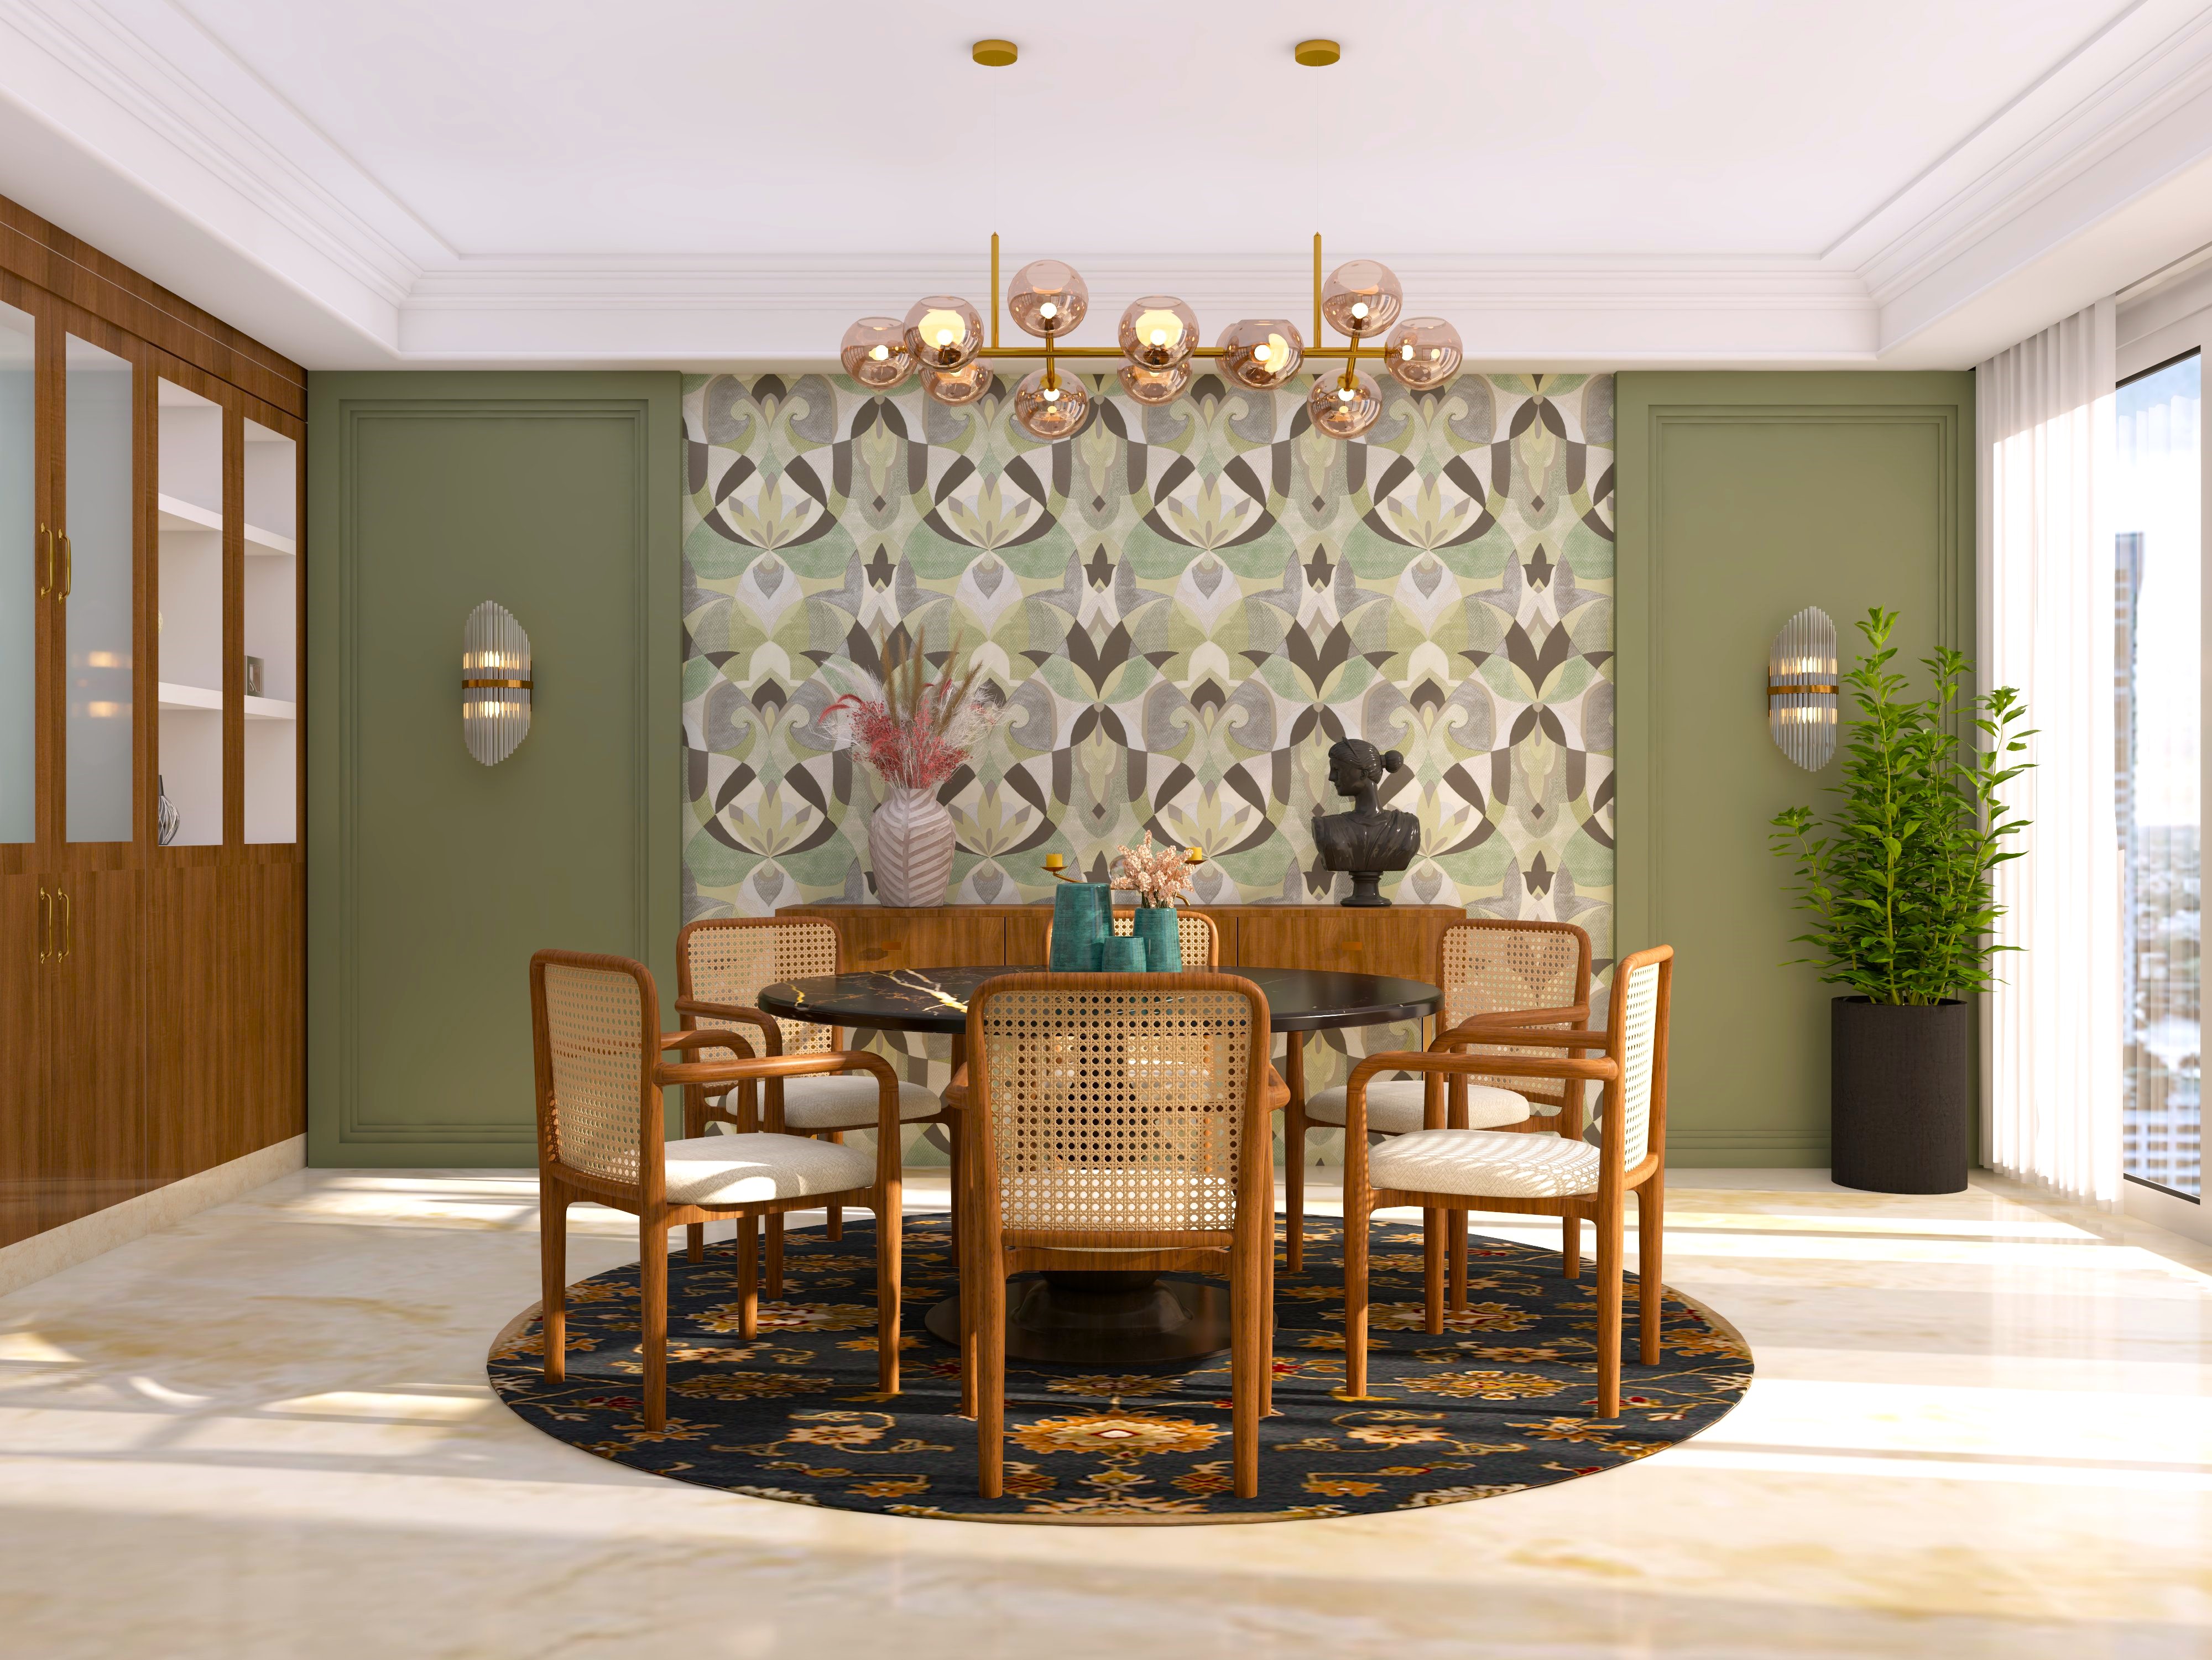 Circular dining room with green walls and rattan chairs - Beautiful Homes